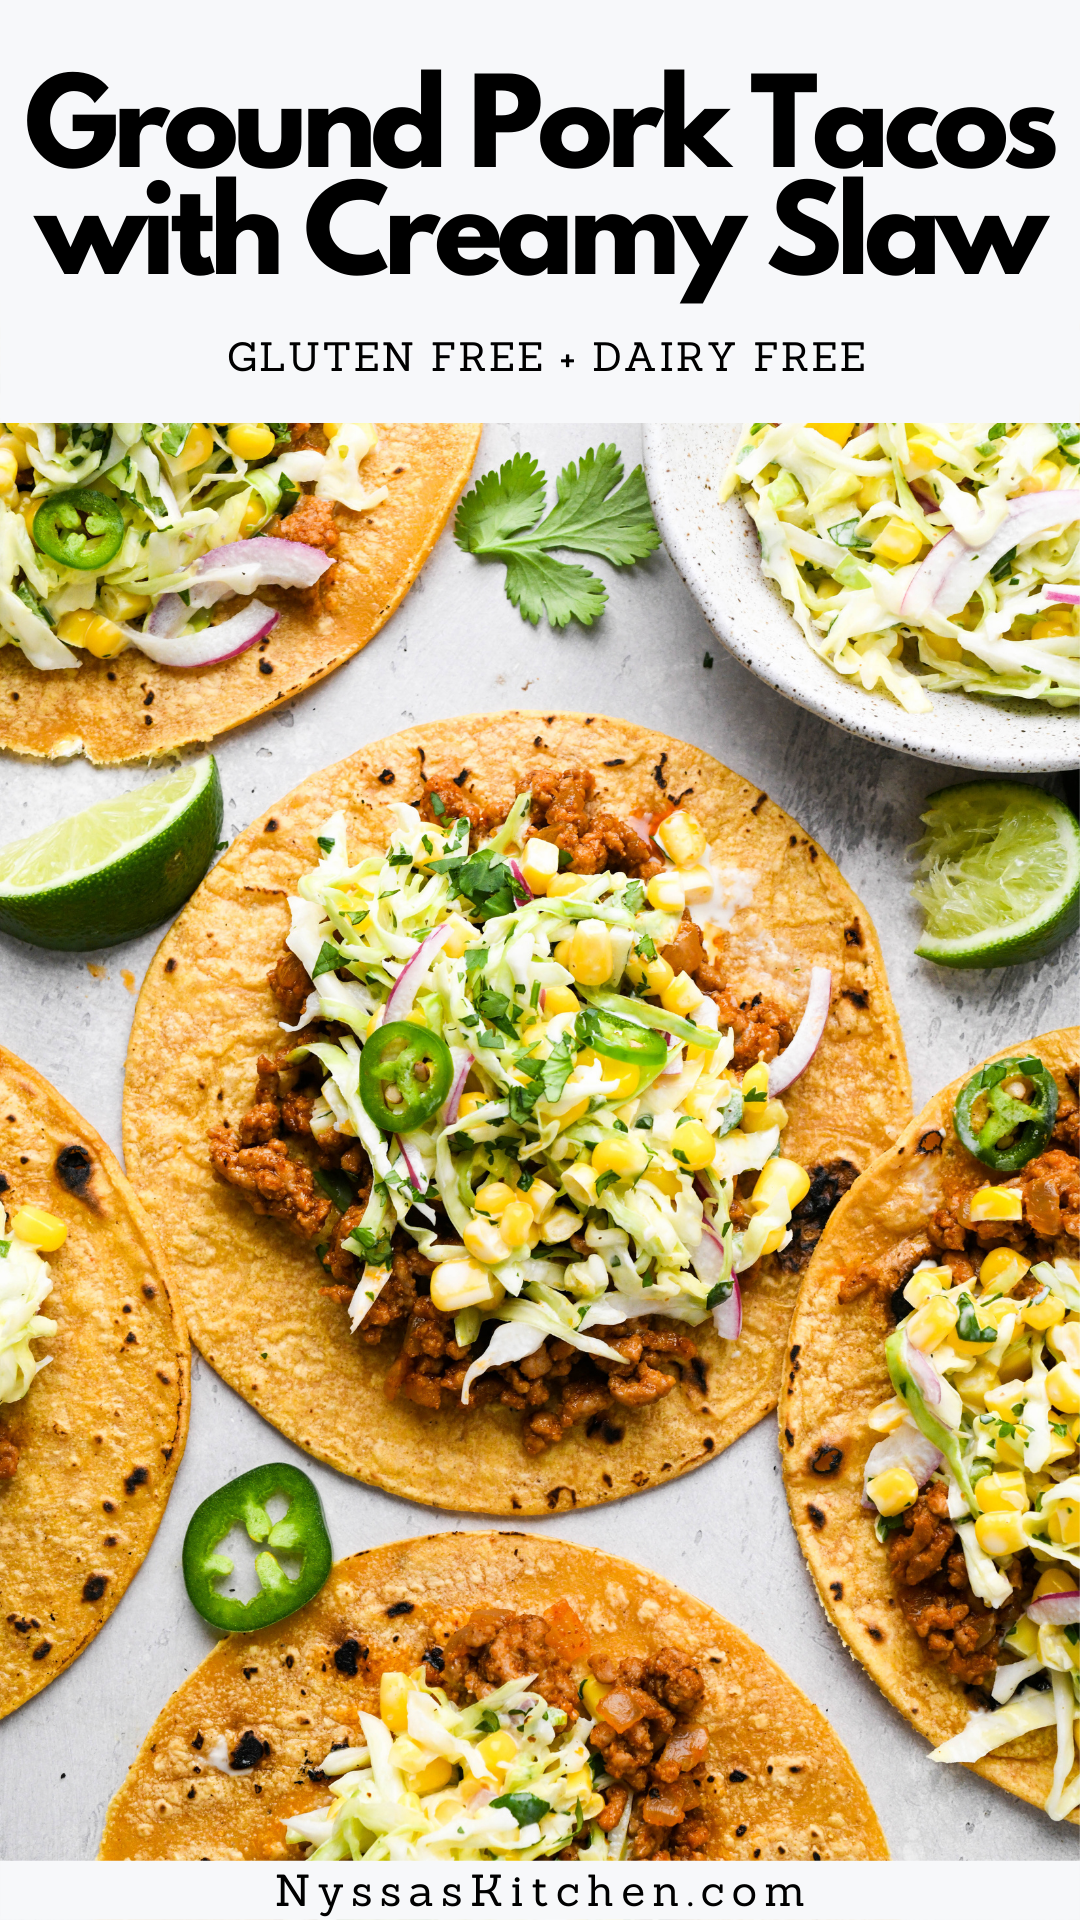 These ground pork tacos with creamy slaw are a simple and flavorful meal that is ready in less than 30 minutes! Perfect for taco night with the family and easy enough to make for a crowd. Made with a simple seasoning blend and a super creamy cabbage slaw with corn, cilantro, jalapeño, and lime. They are irresistibly delicious! Gluten free, dairy free, paleo option, and Whole30 option.